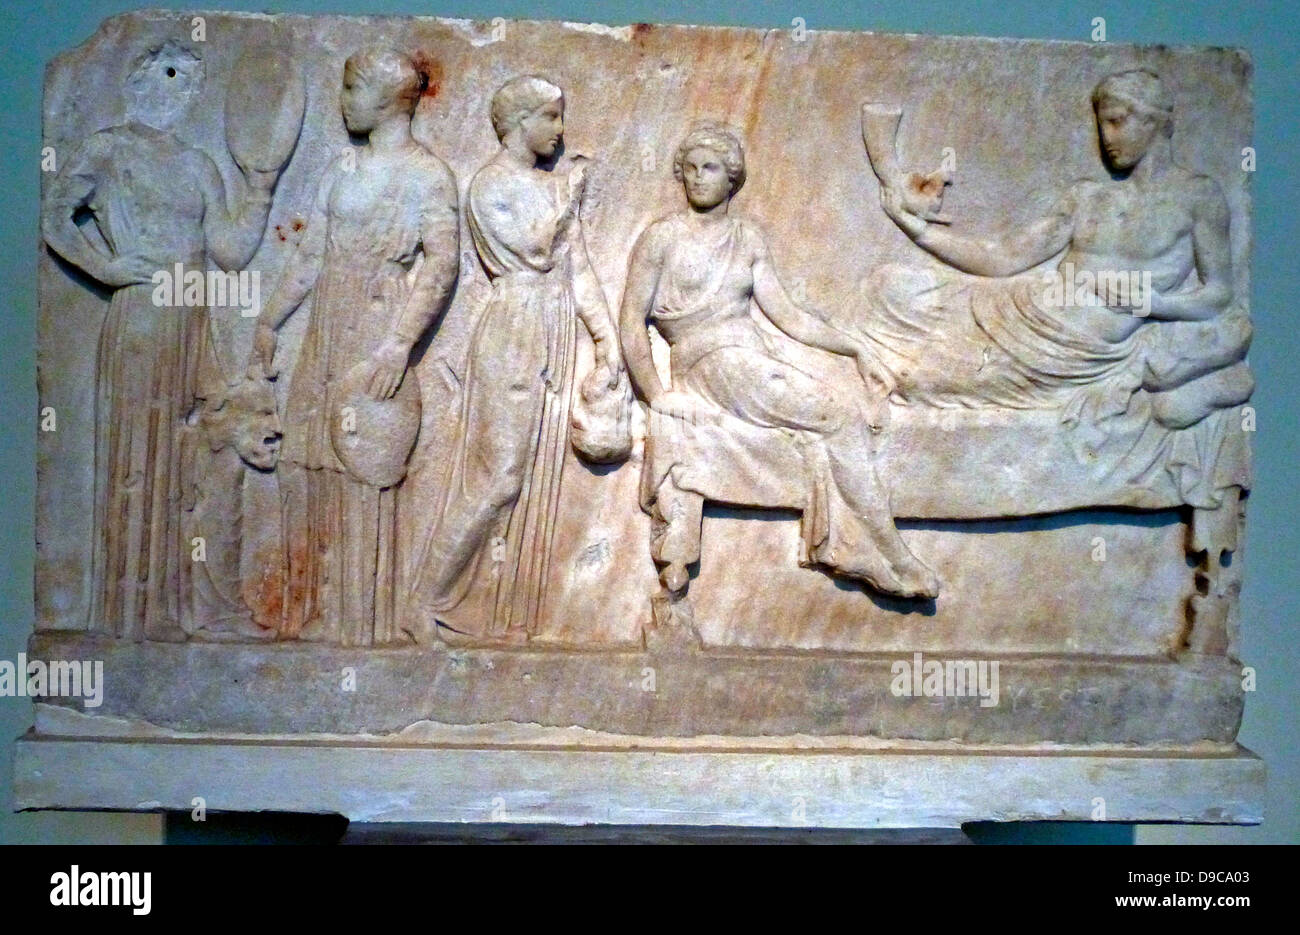 Votive relief.  Marble.  Found in the Piraeus.  Dionysus is shown on a kline, holding a rhyton and a phiale.  At the foot of his kline stands a woman, Paideia, with her face turned towards a man who holds a theatrical mask in his left hand.  Two actors are shown at left.  The relief was dedicated by actors to the god Dionysus after a theatrical performance. circa 400 BC. Stock Photo